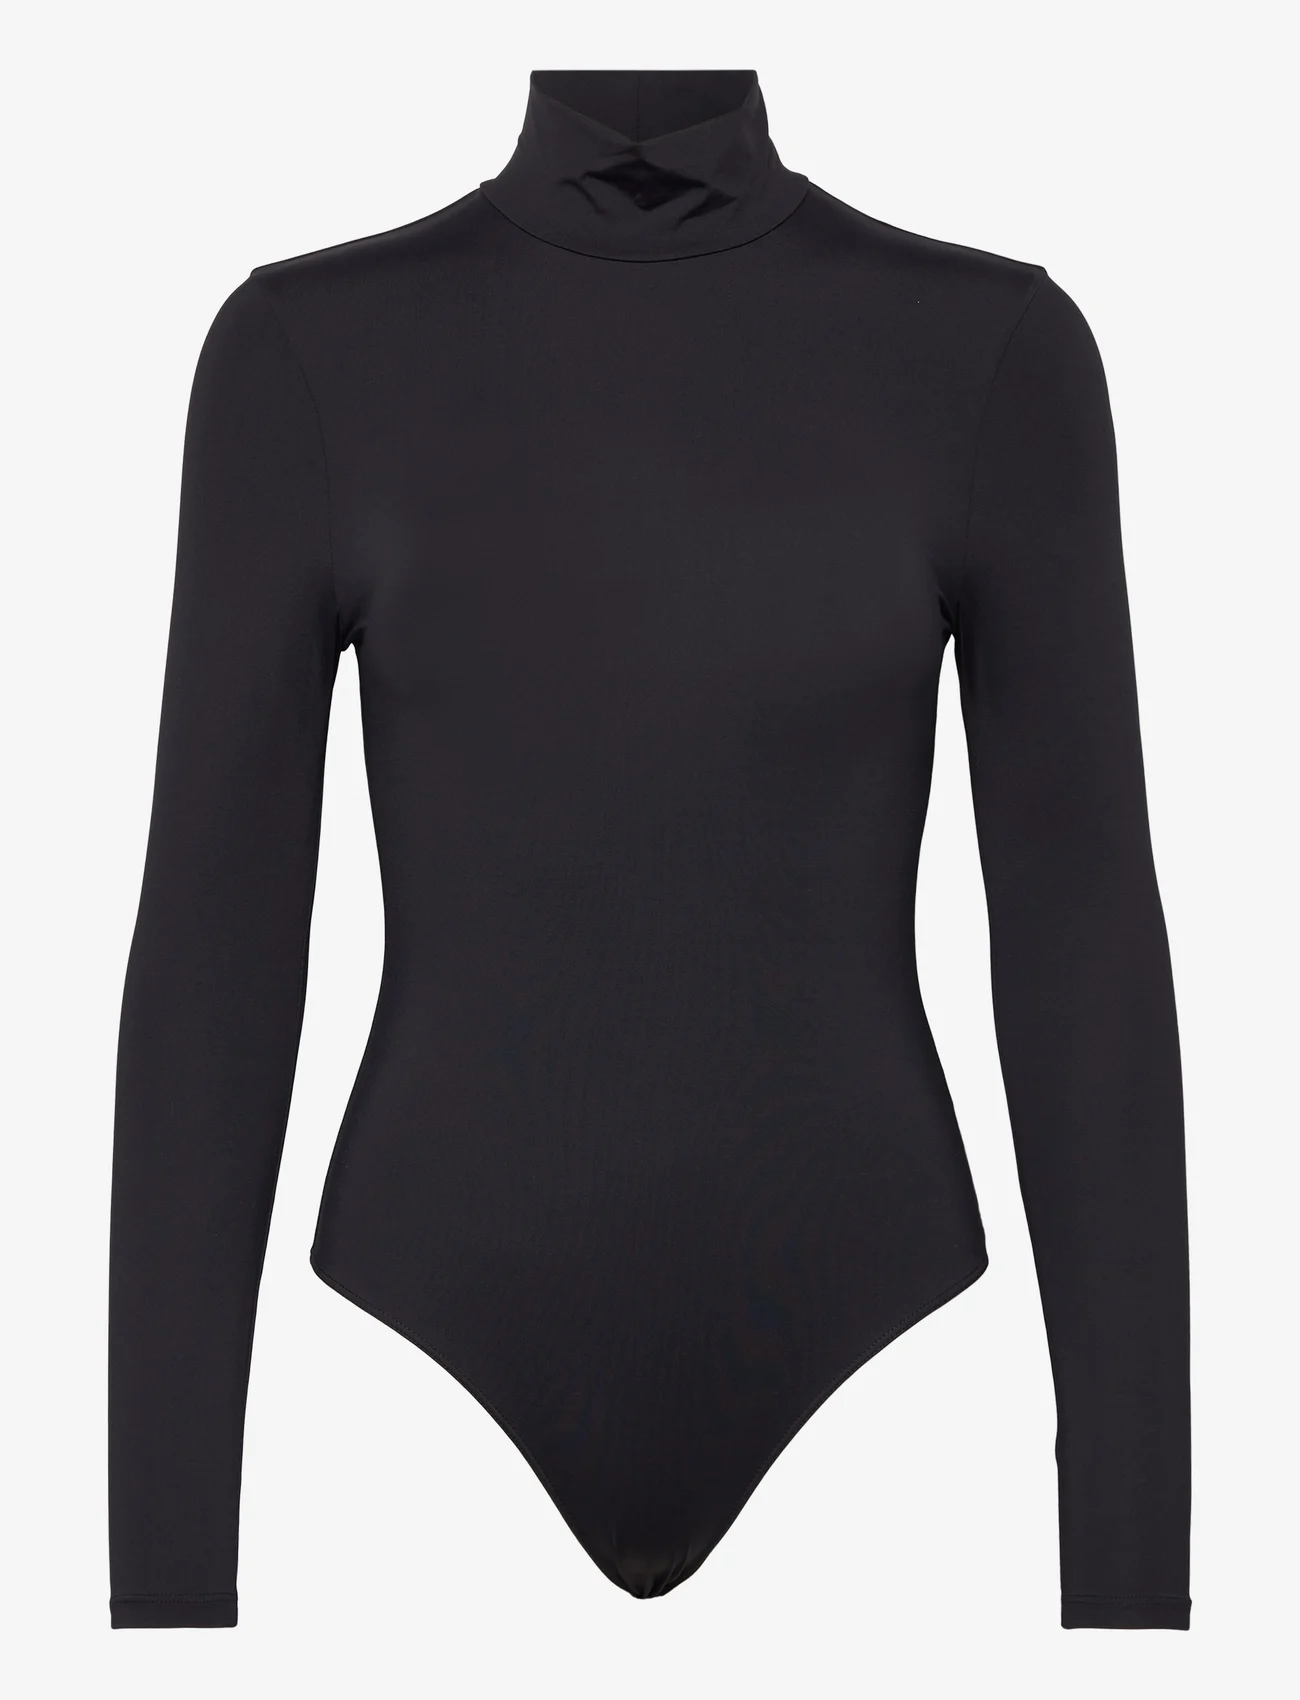 Theory - TURTLENECK BS.MOTION - bodies - black - 0